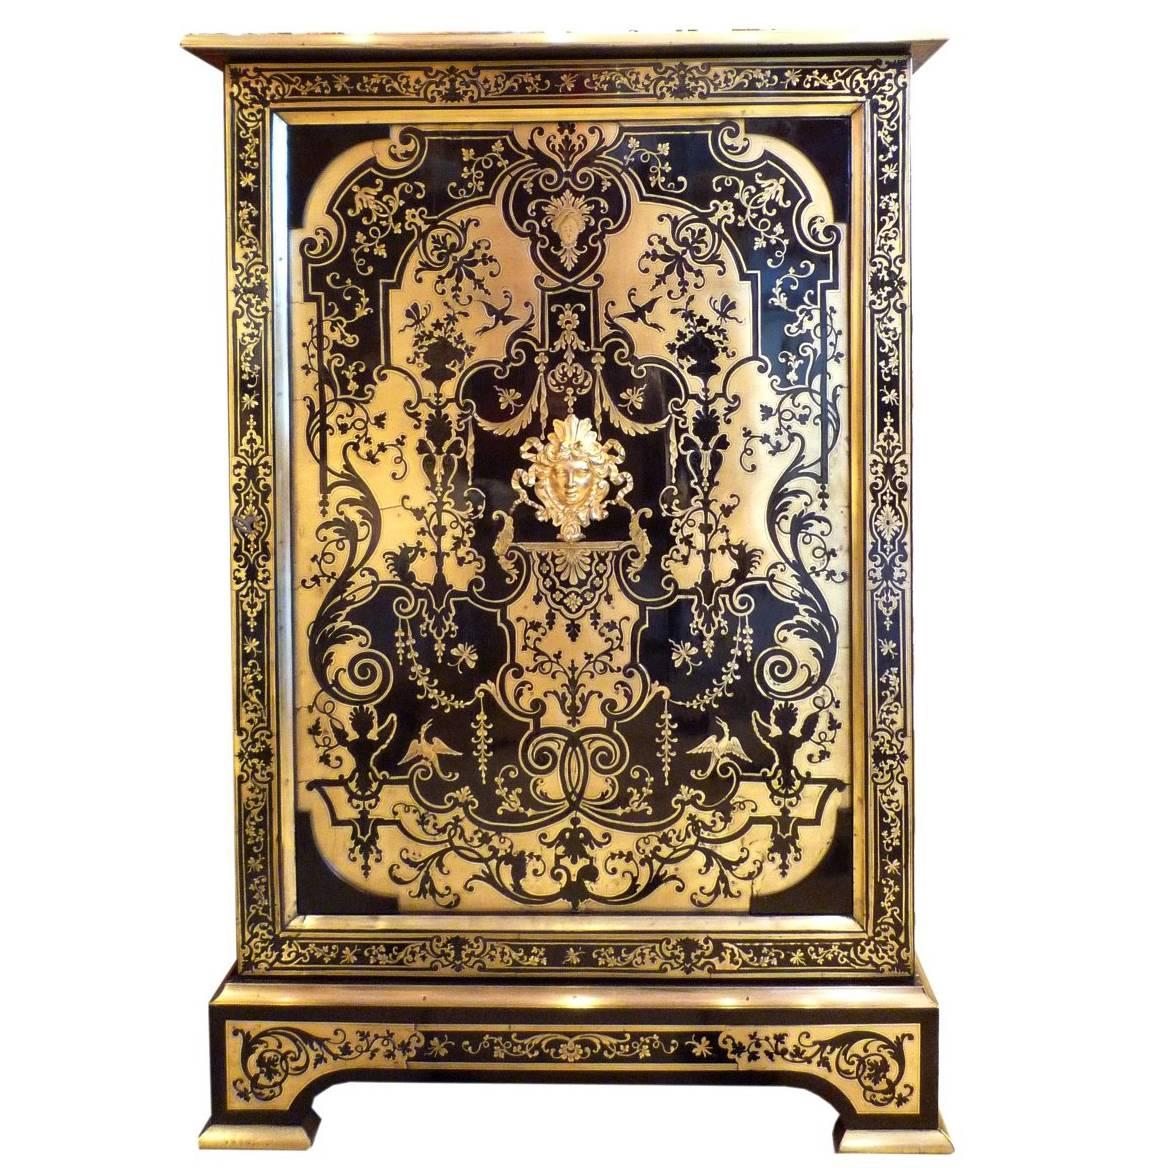 French Louis XIV Boulle Marquetry Cabinet, Remounted in the 19th Century